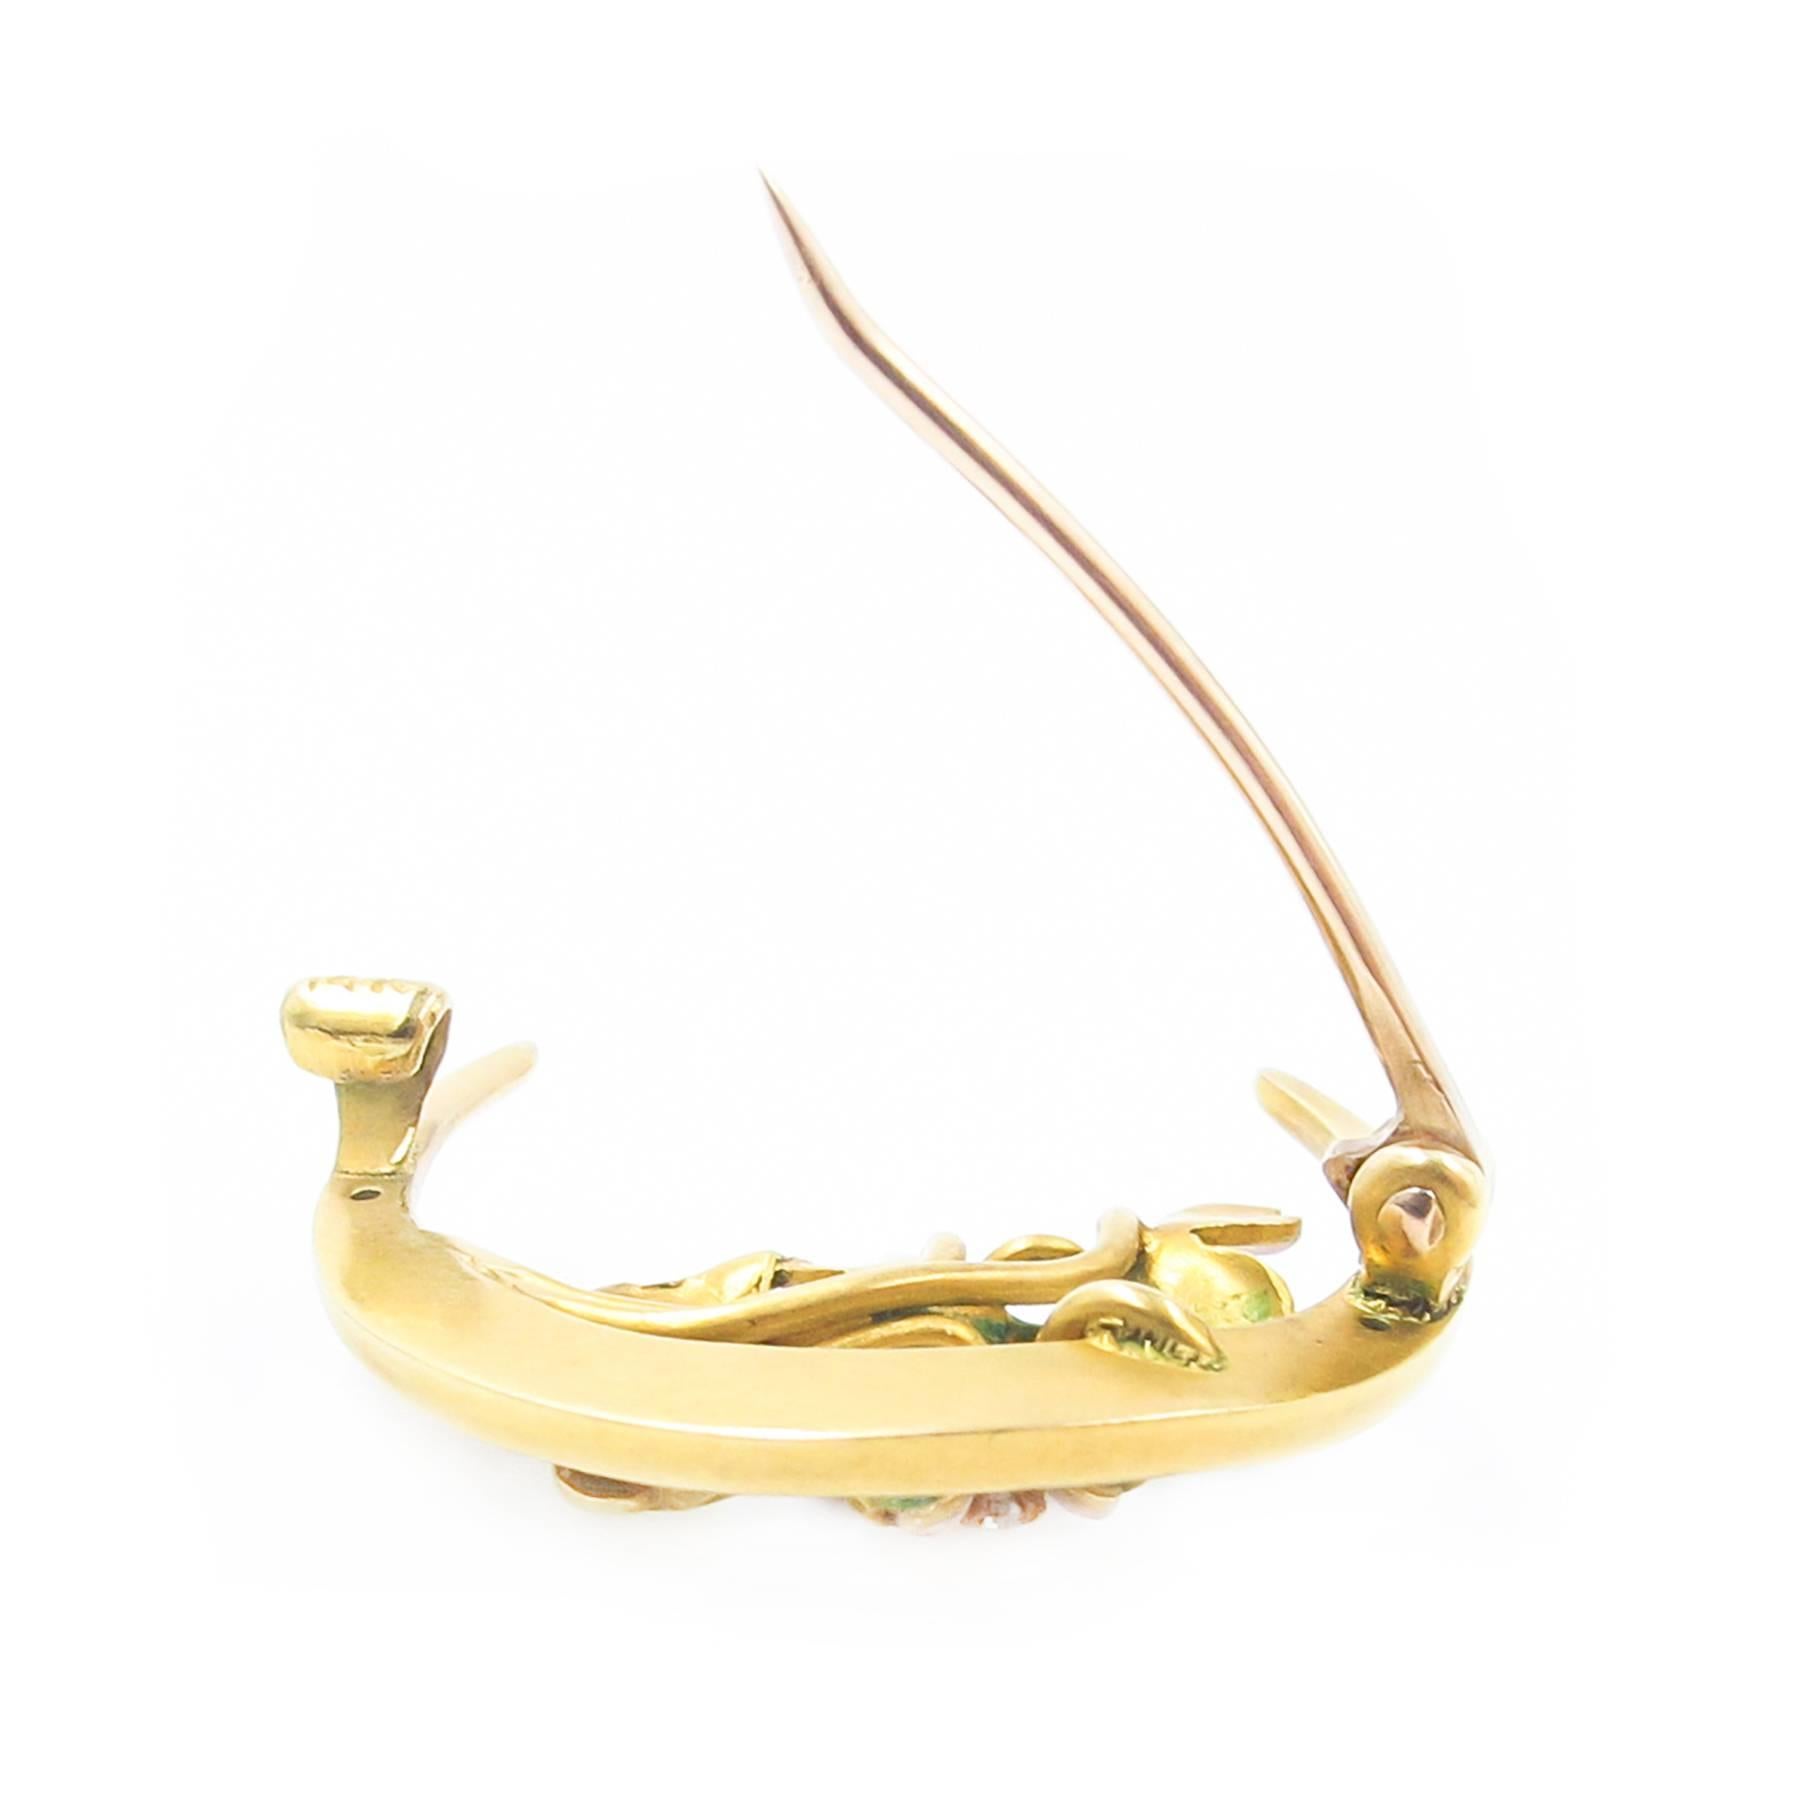 Art Nouveau Enamel Diamond Gold Crescent Brooch In Excellent Condition For Sale In Toronto, Ontario